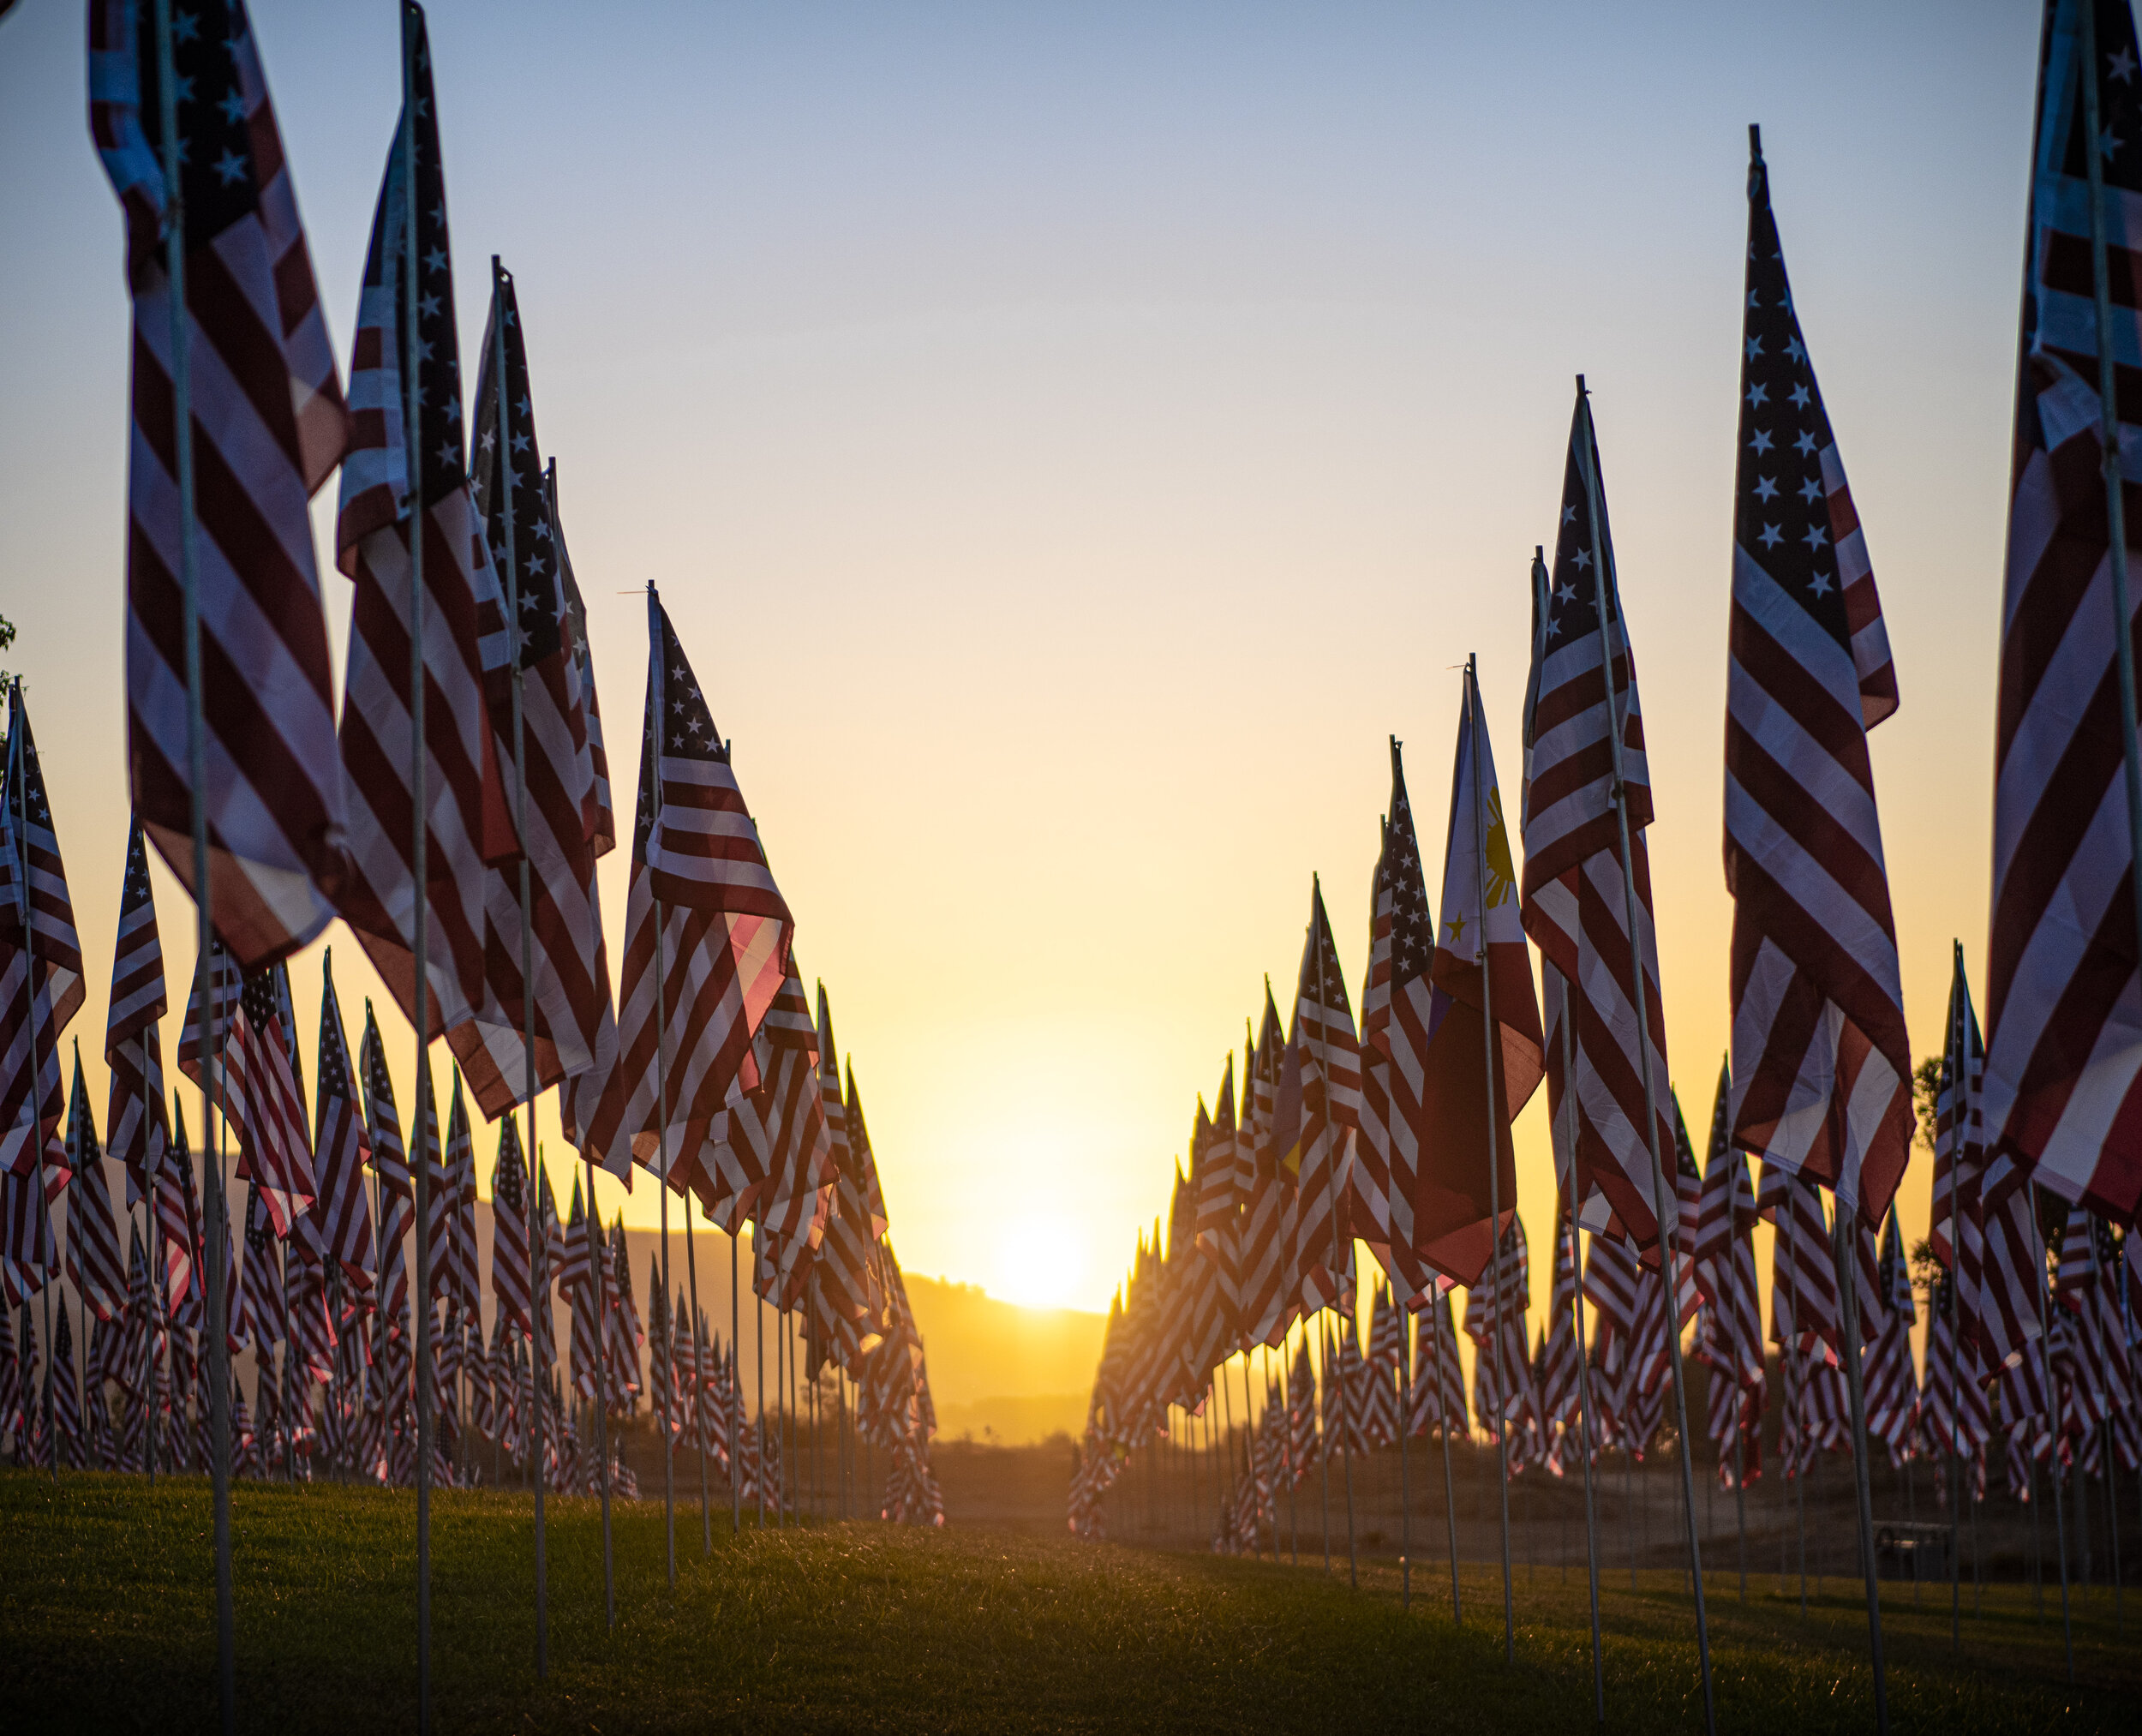  The sun rises among the Waves of Flags memorial for the 20th anniversary for the 9/11 attacks located at Pepperdine University in Malibu Calif on September 11, 2021. (Jon Putman | The Corsair) 